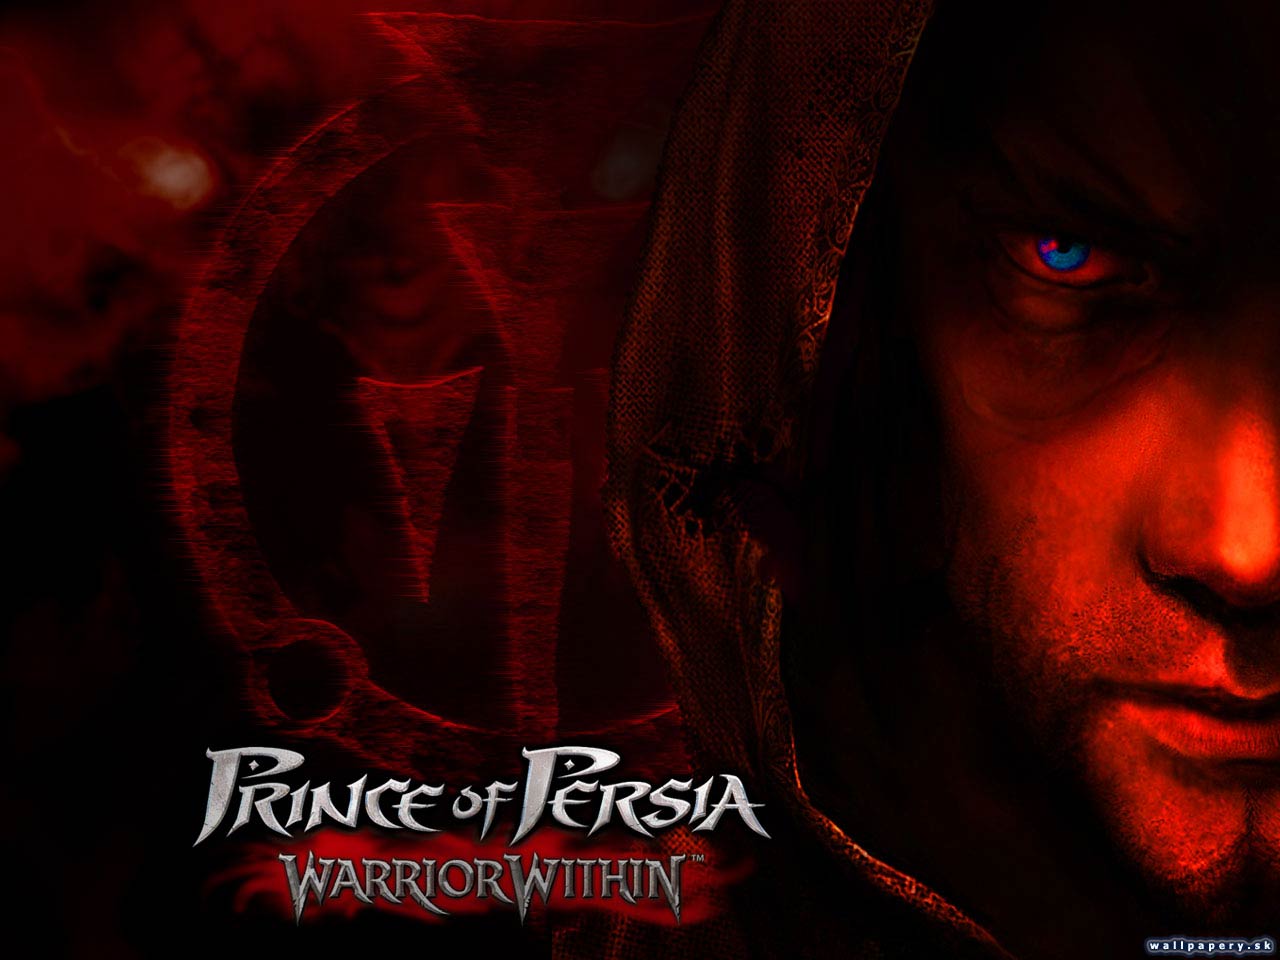 Prince of Persia: Warrior Within - wallpaper 2